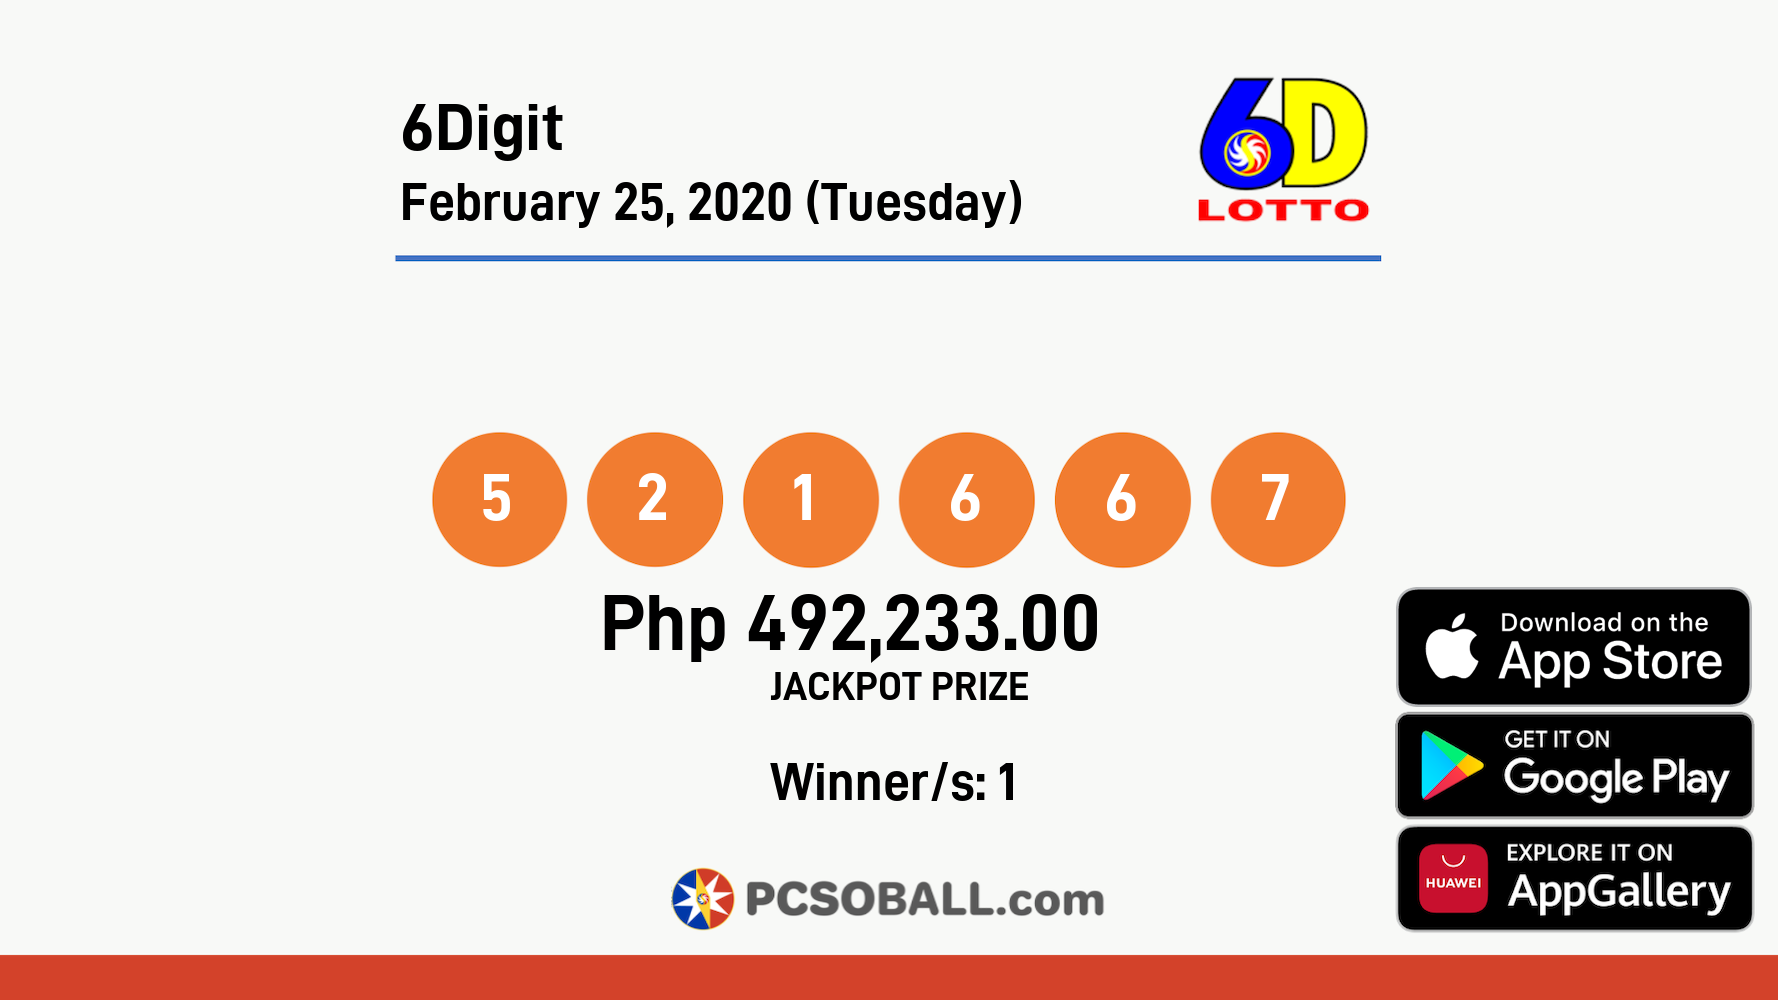 6Digit February 25, 2020 (Tuesday) Result